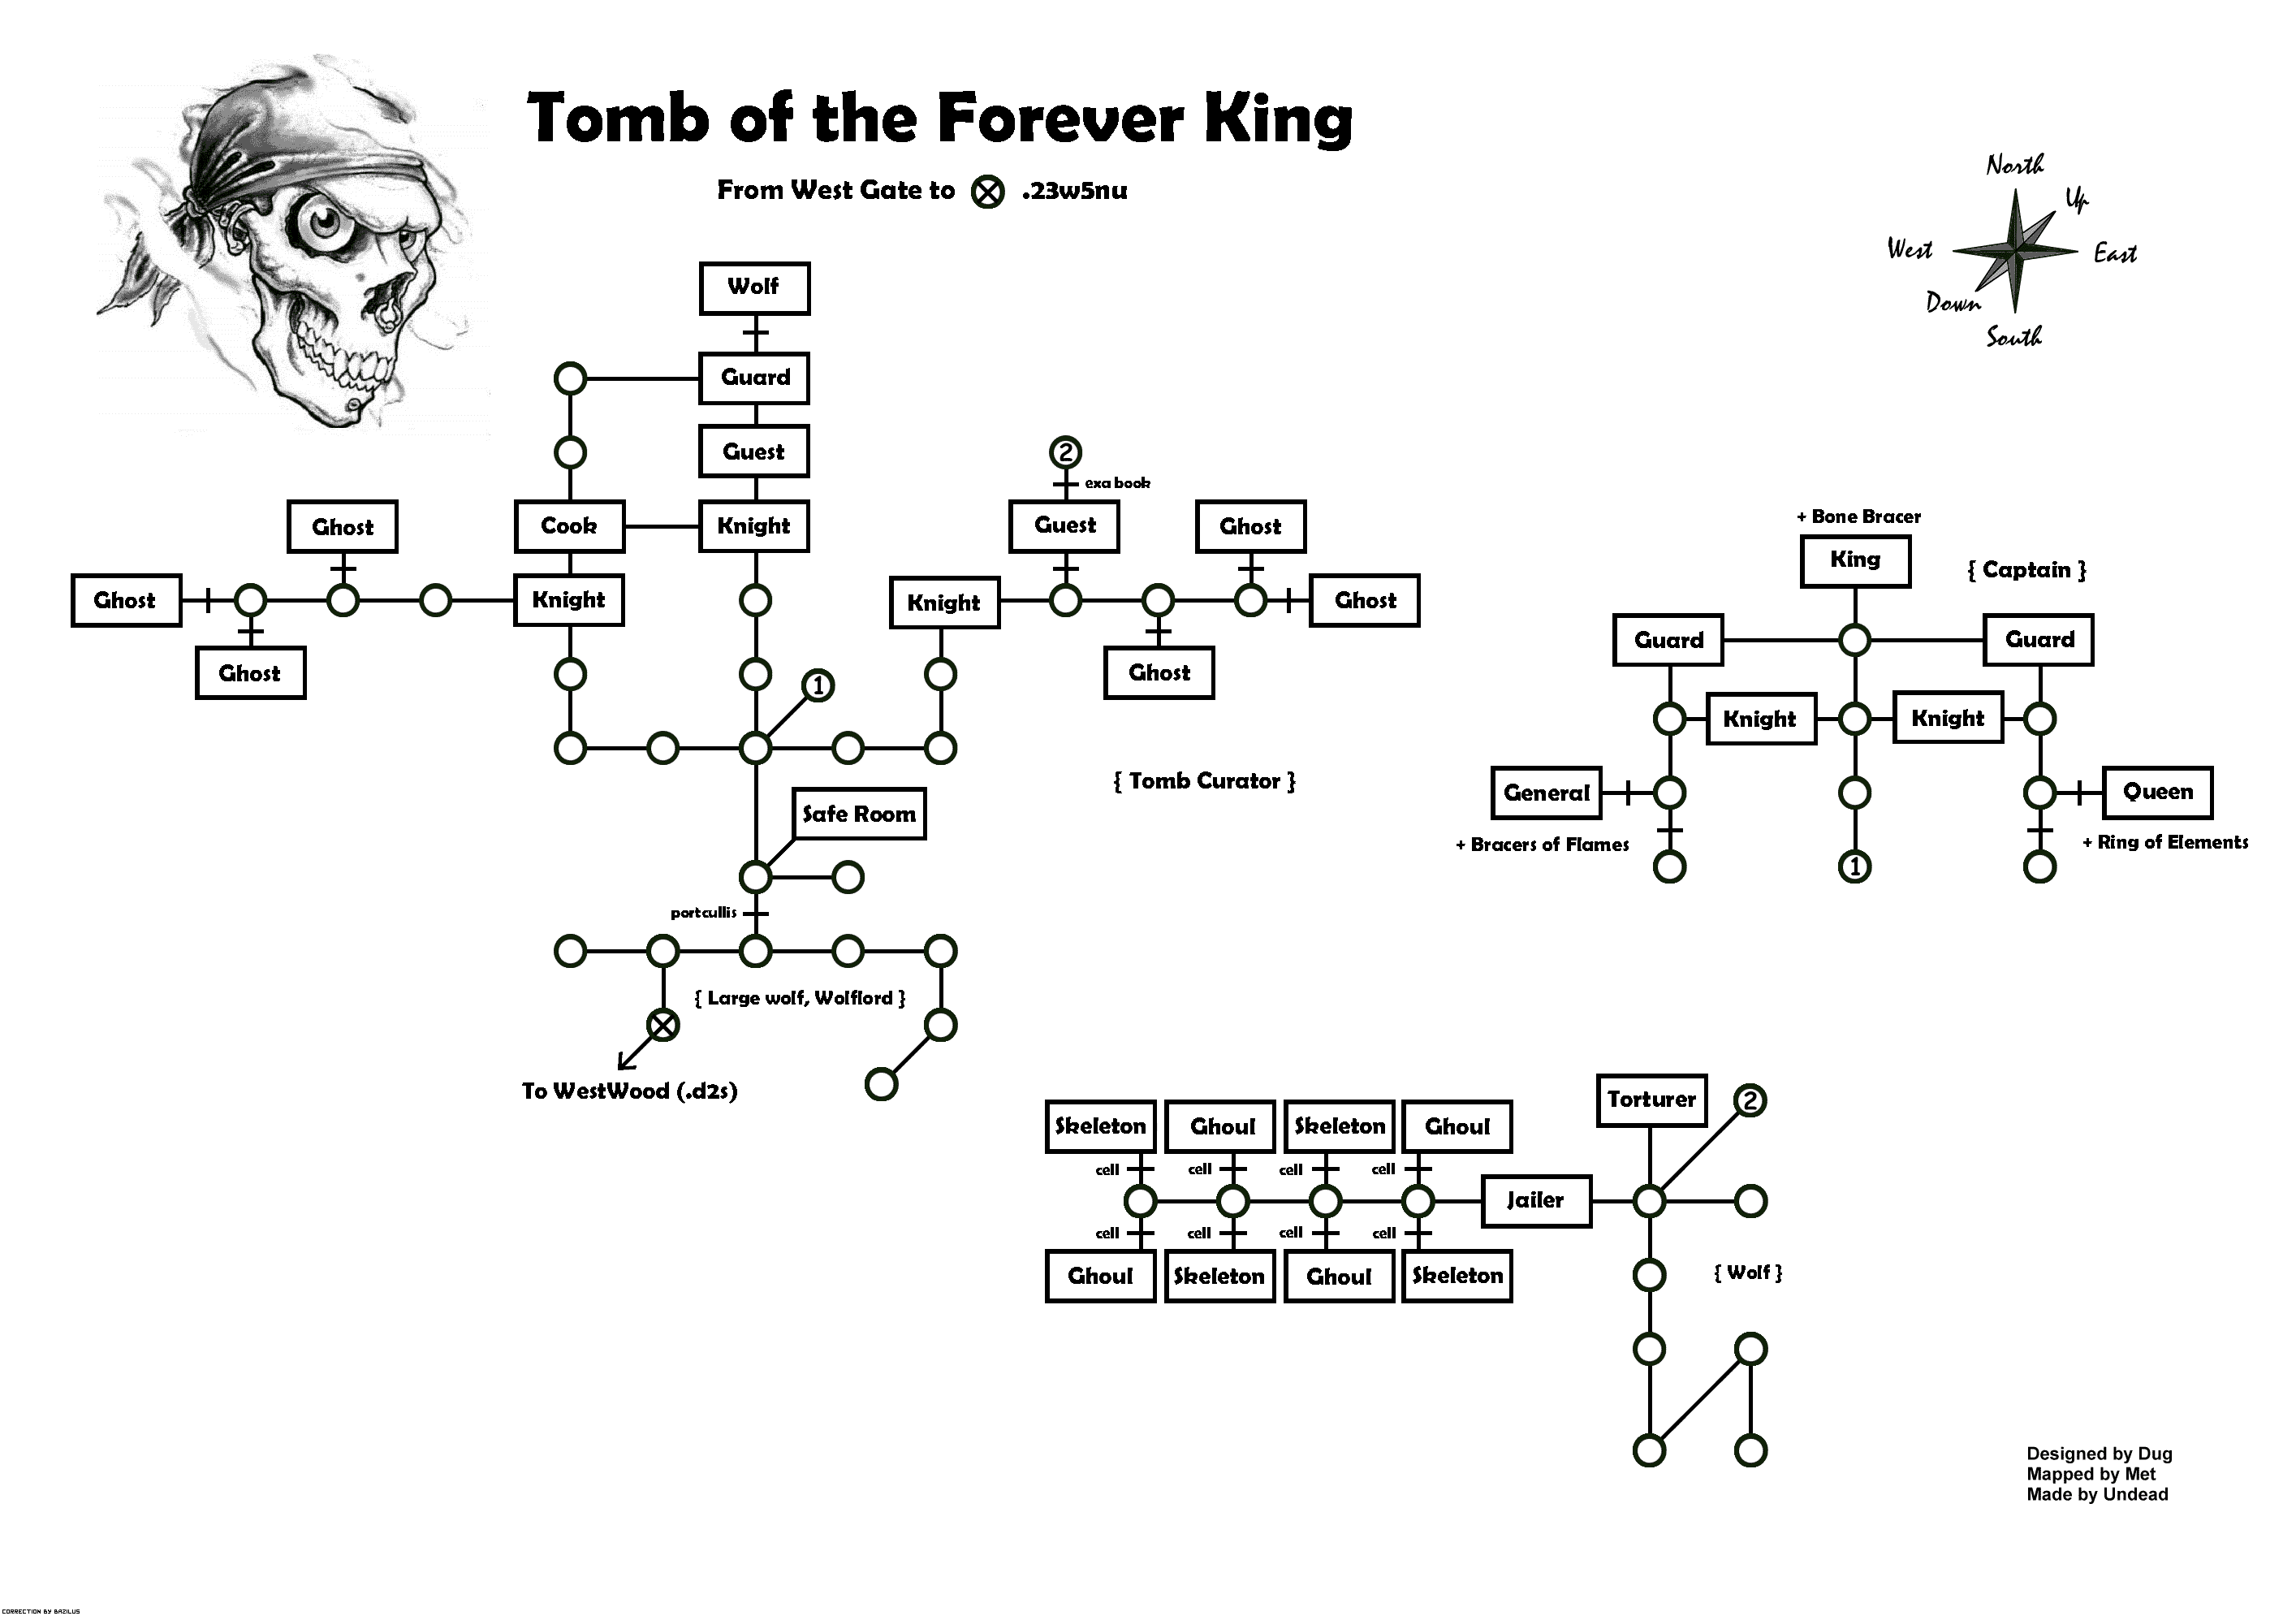 BH_Tomb_of_The_Forever_King.png